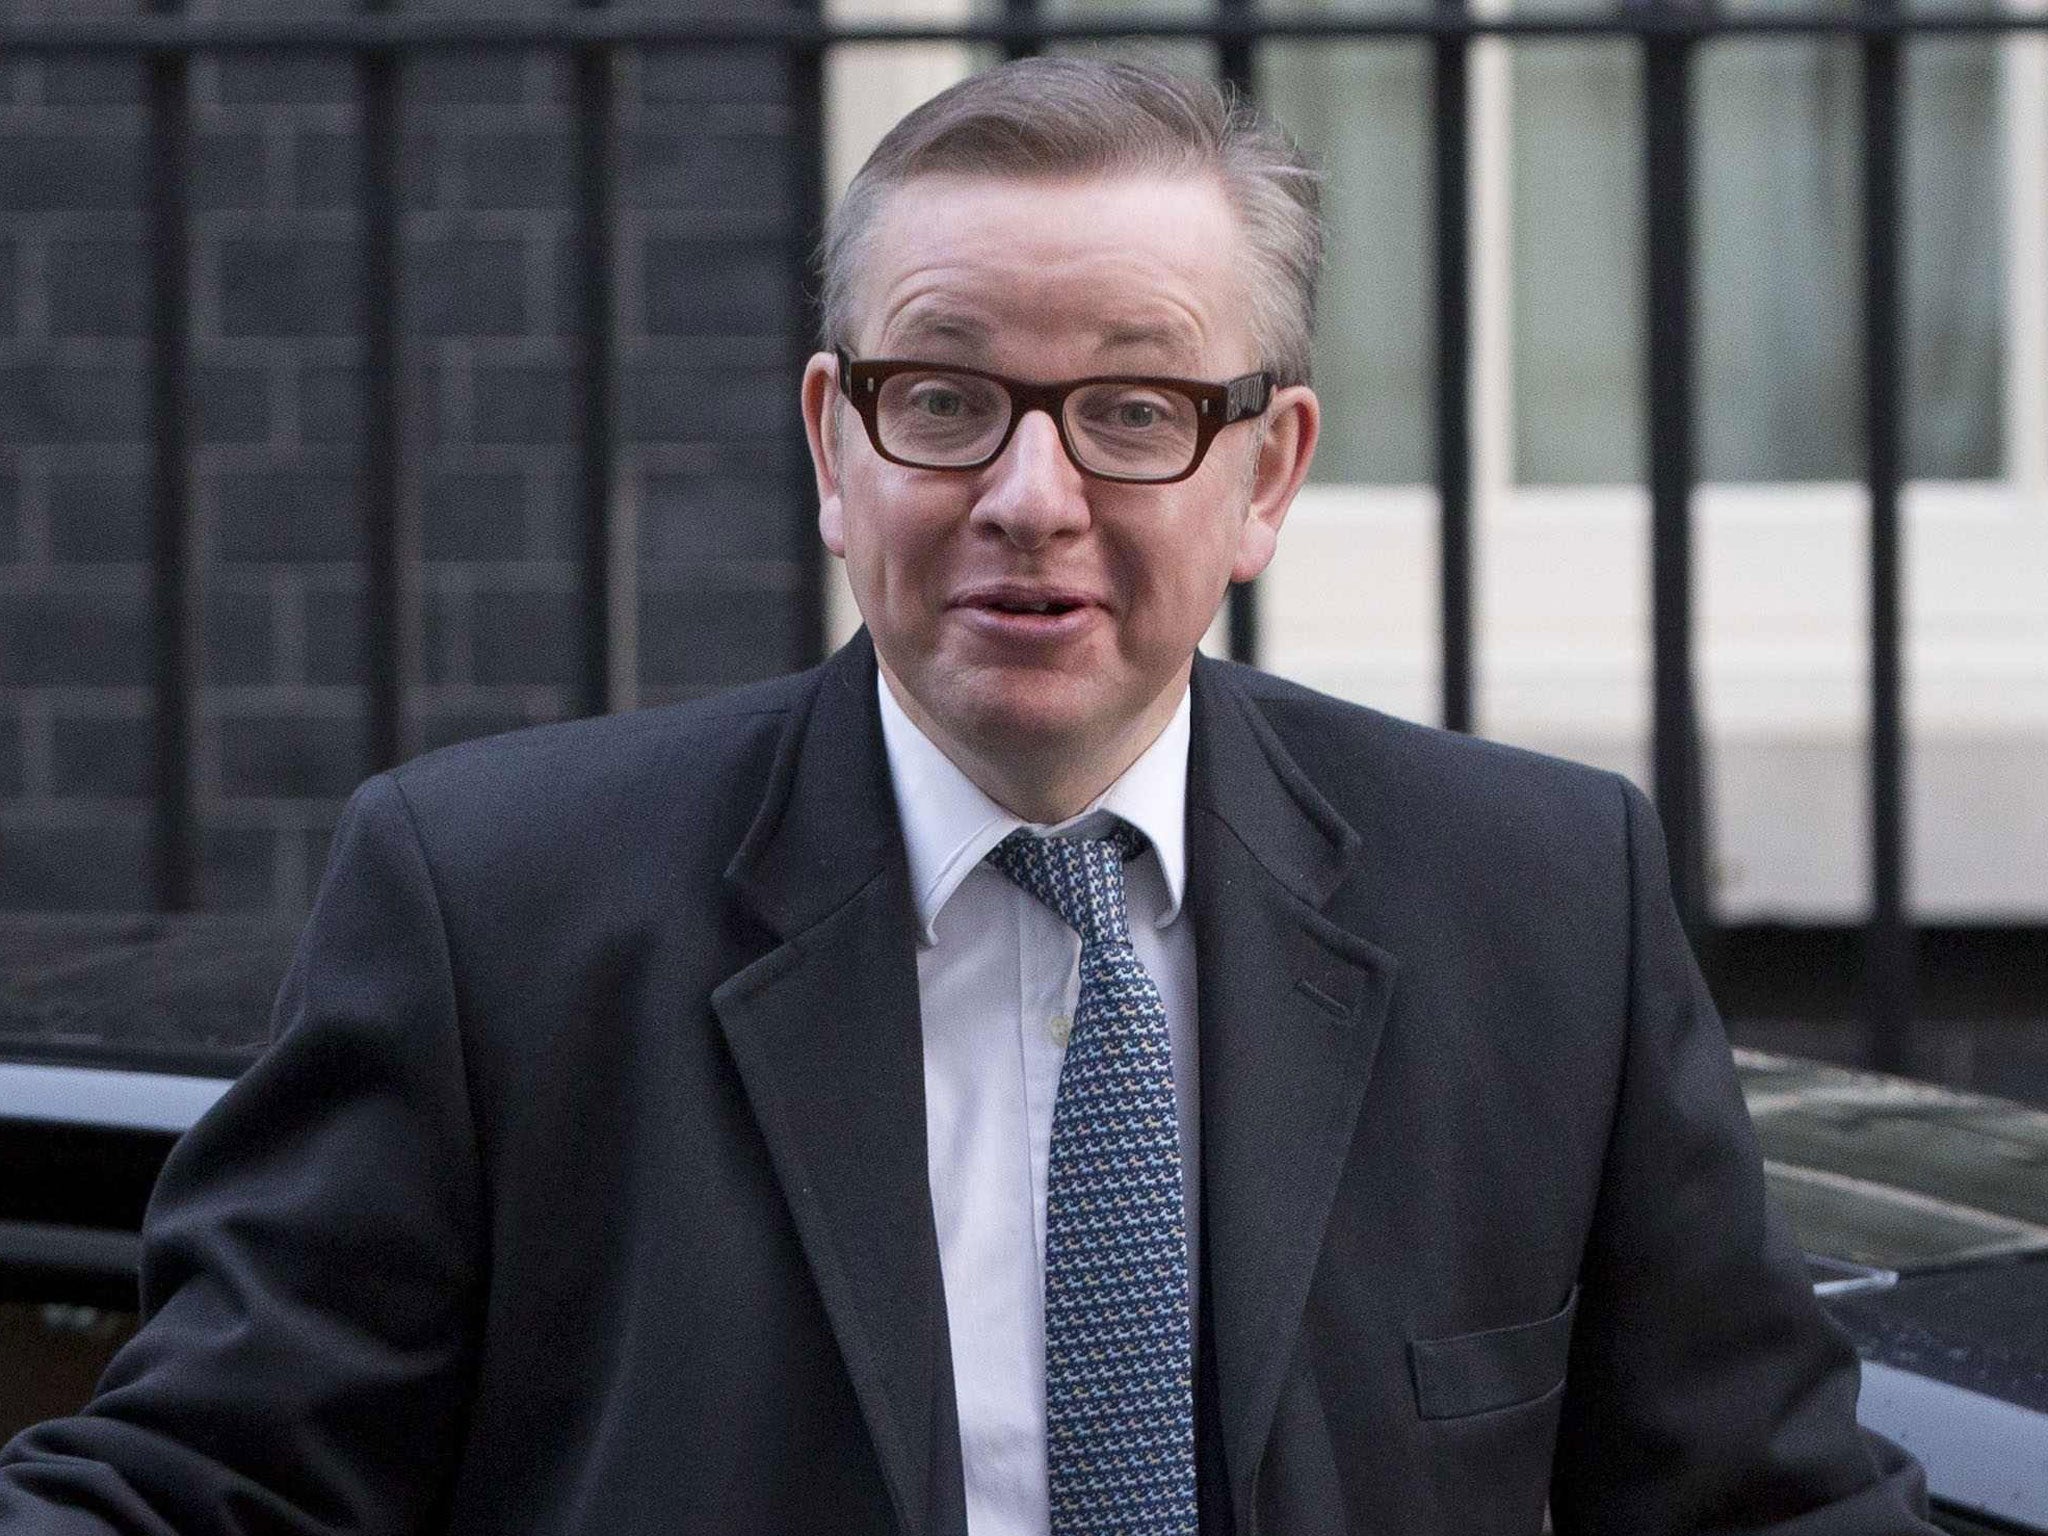 Michael Gove wants a tougher approach in primary schools